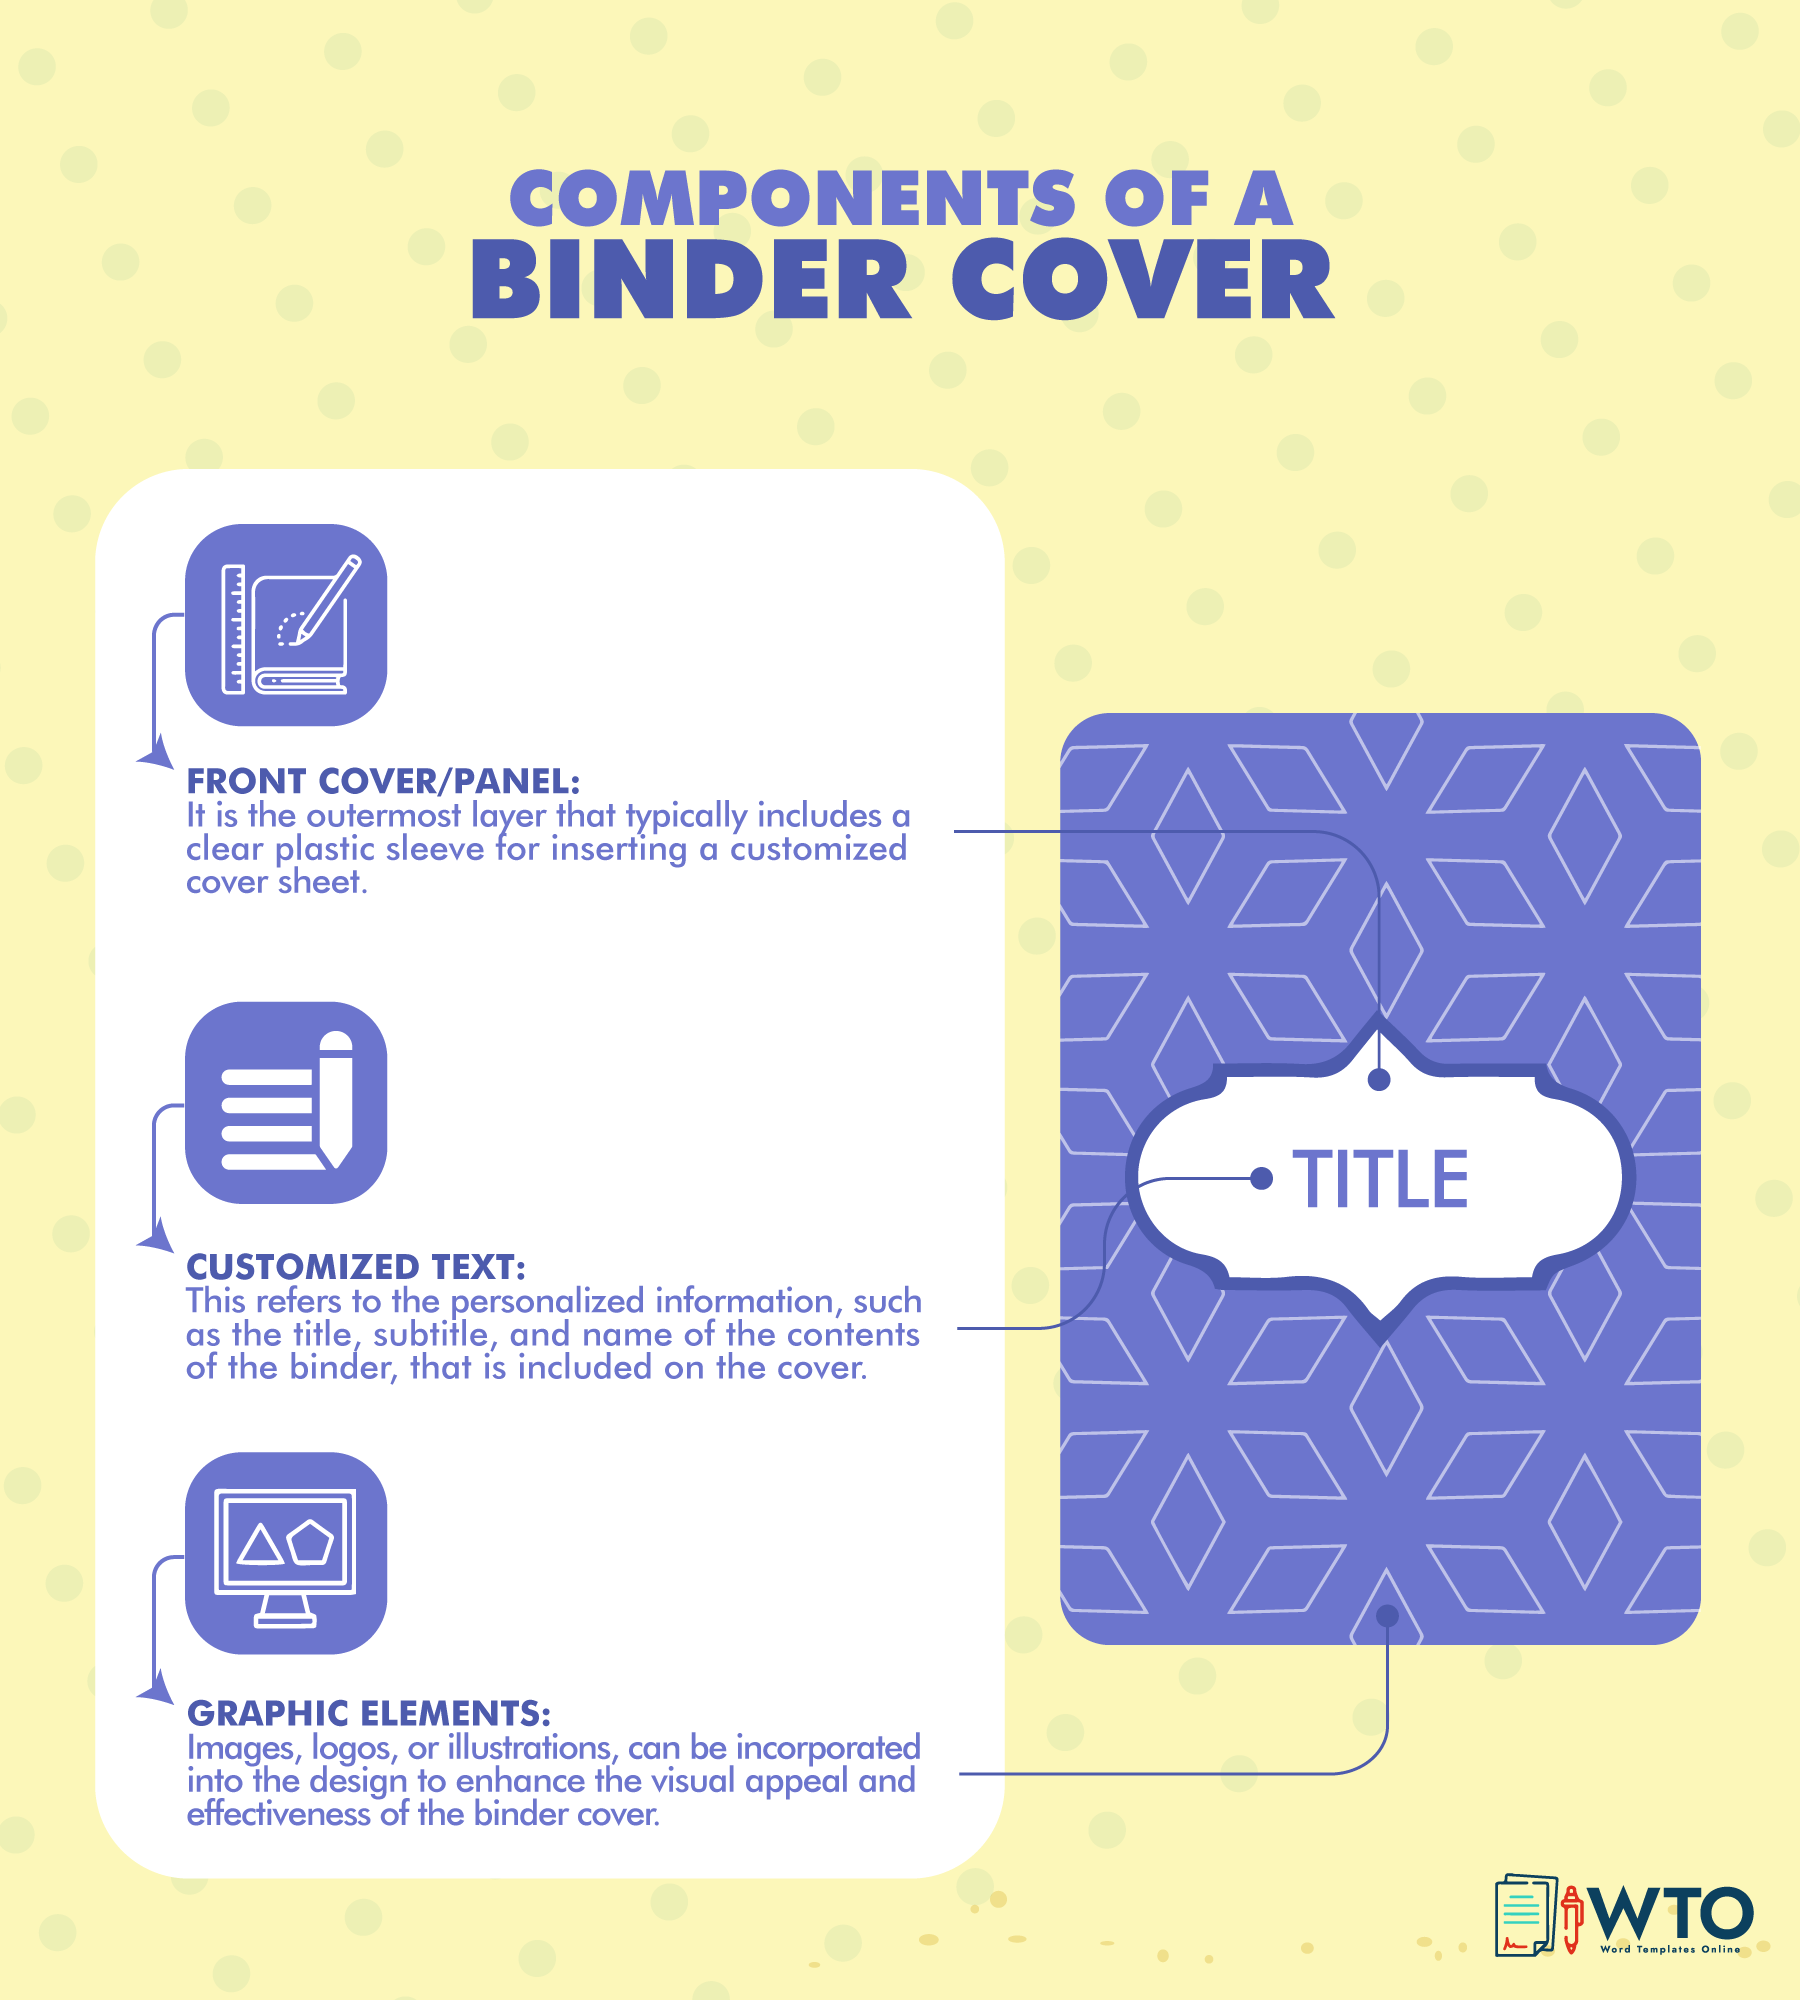 This infographic is about binder cover components.